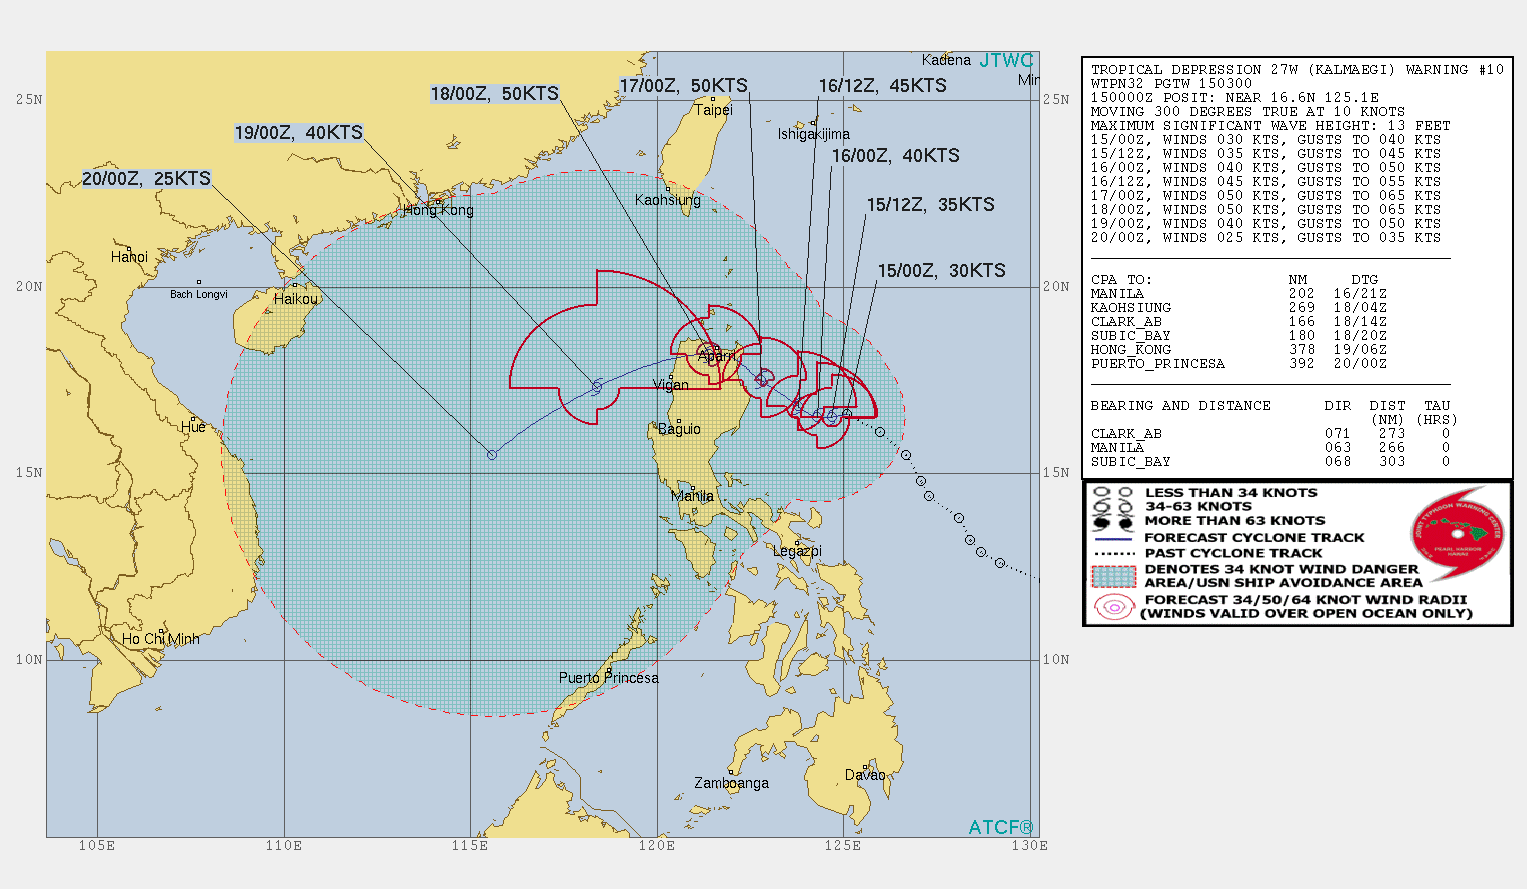 SLOWLY APPROACHING NORTHEAST LUZON AND FORECAST TO INTENSIFY GRADUALLY